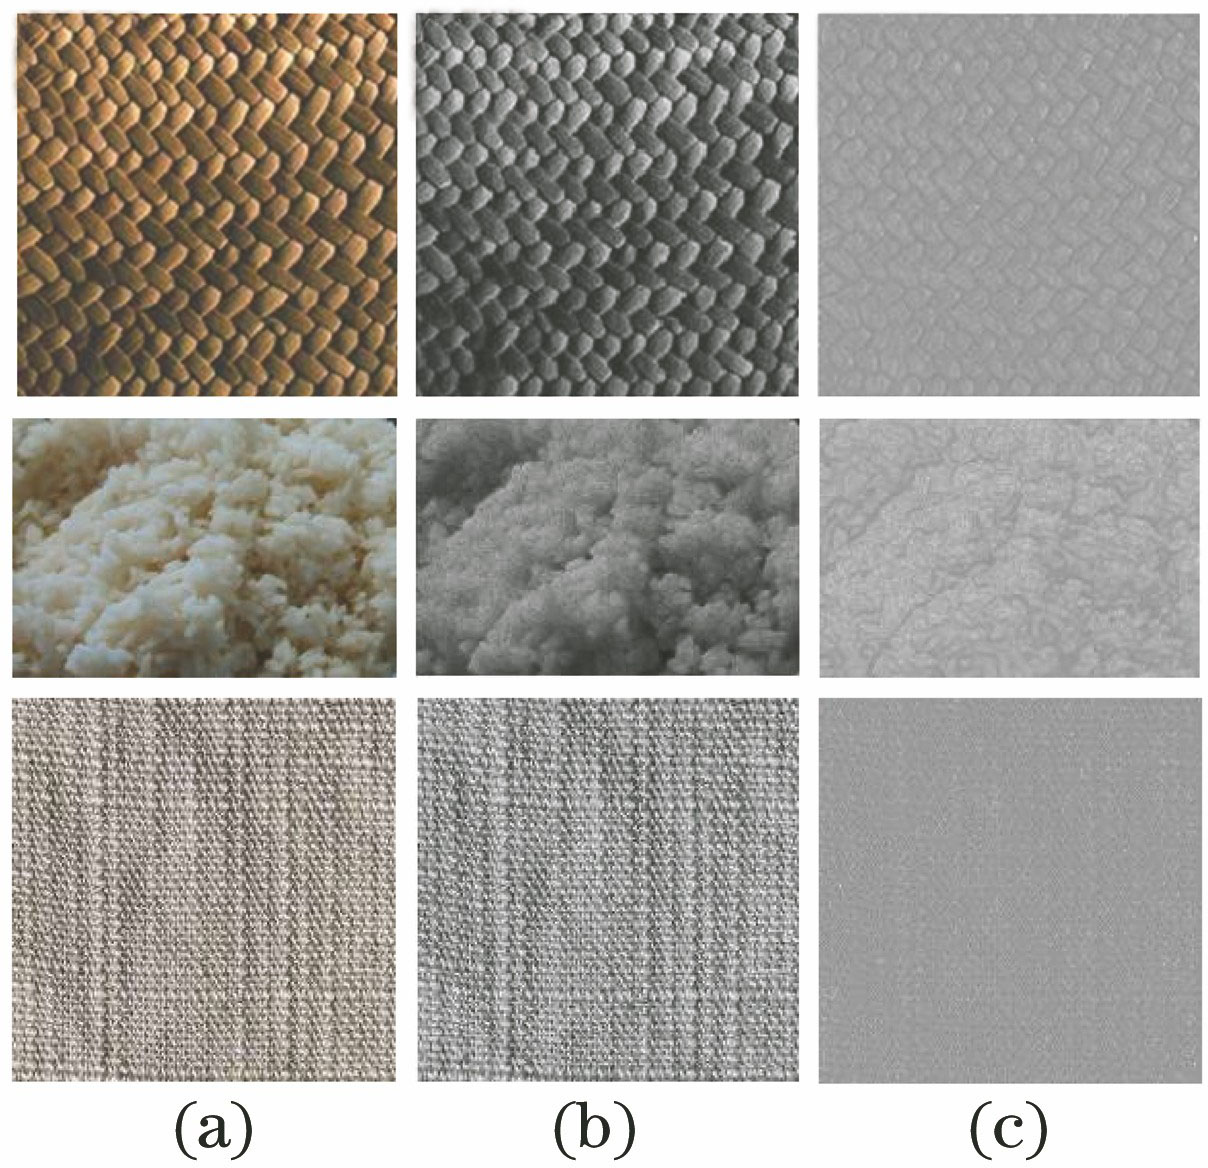 Decomposition effects of the texture images. (a) Source texture image; (b) decomposed structure information; (c) decomposed texture information